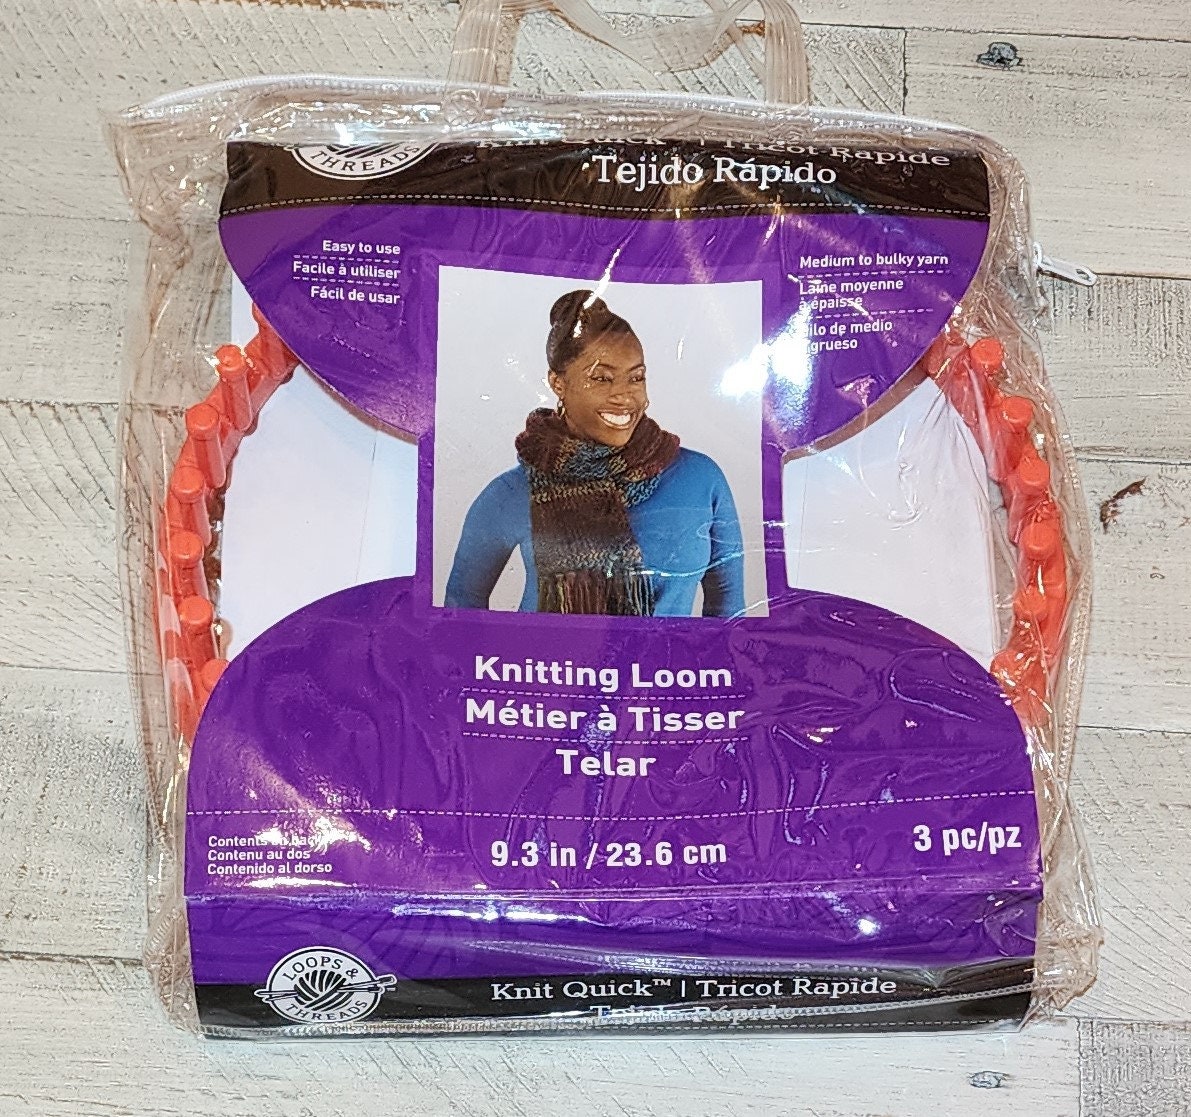 Loops & Threads Knit Quick Knitting Loom Set